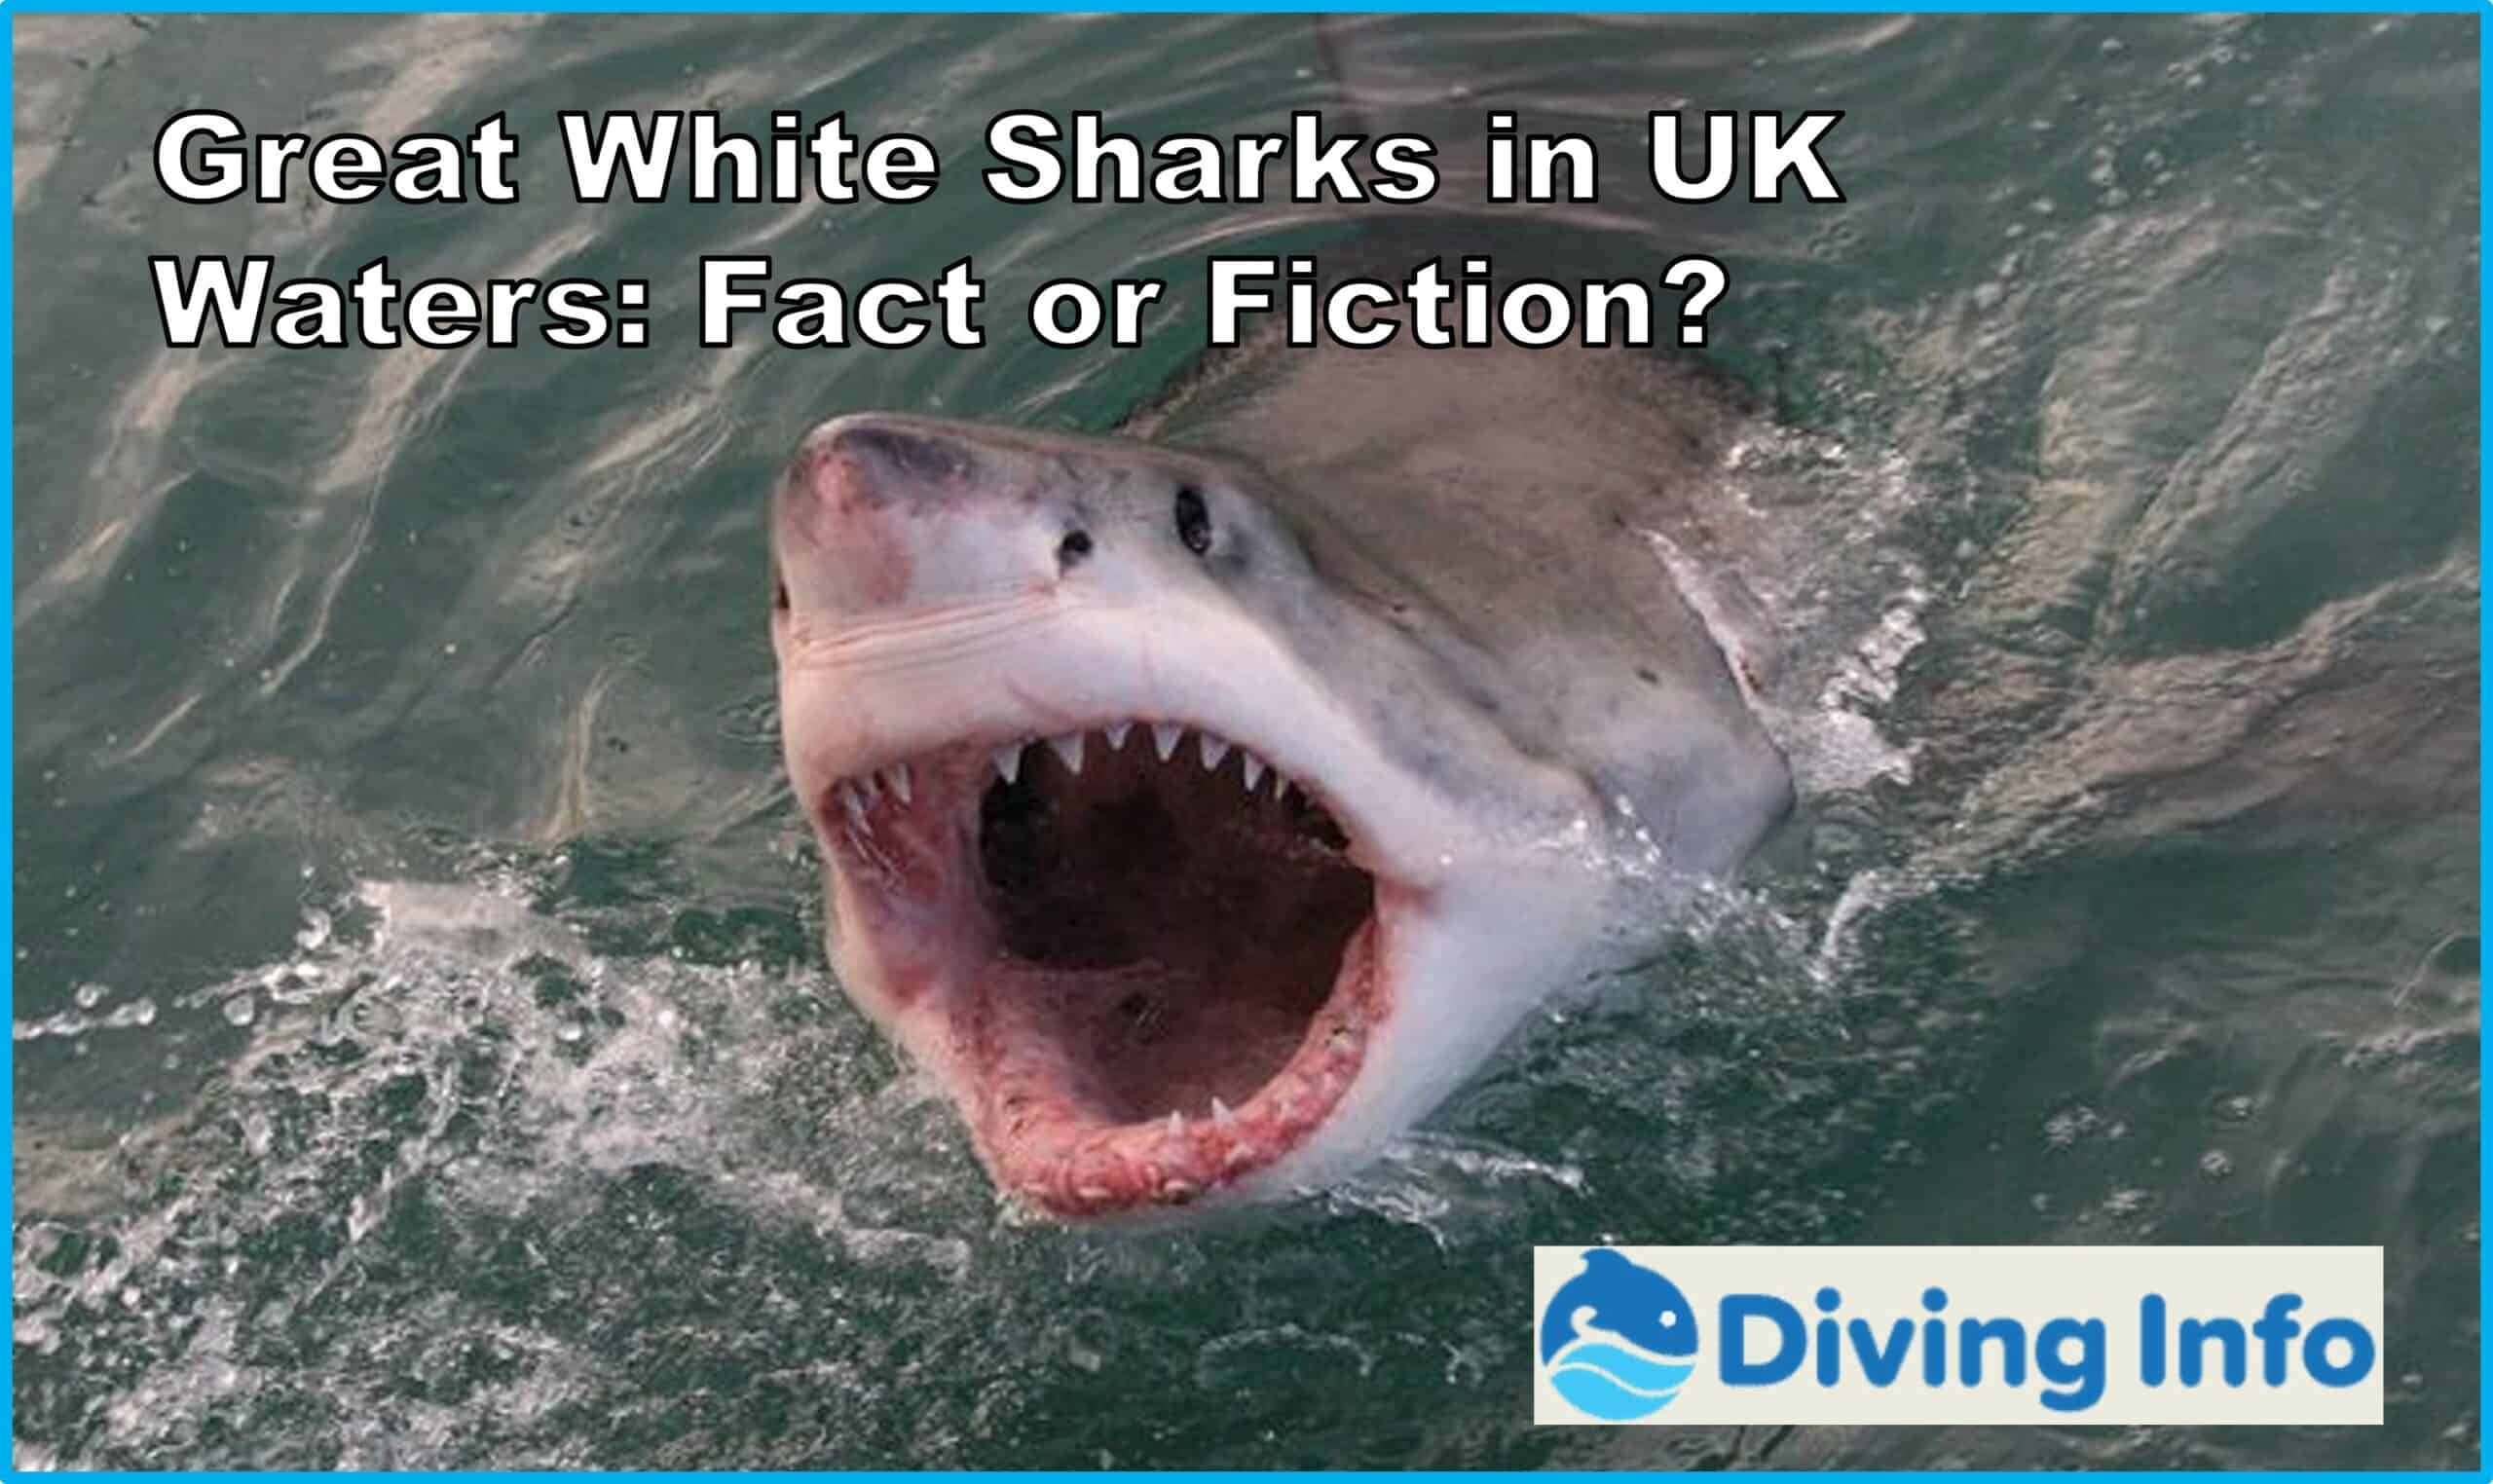 Great White Sharks in UK Waters Fact or Fiction